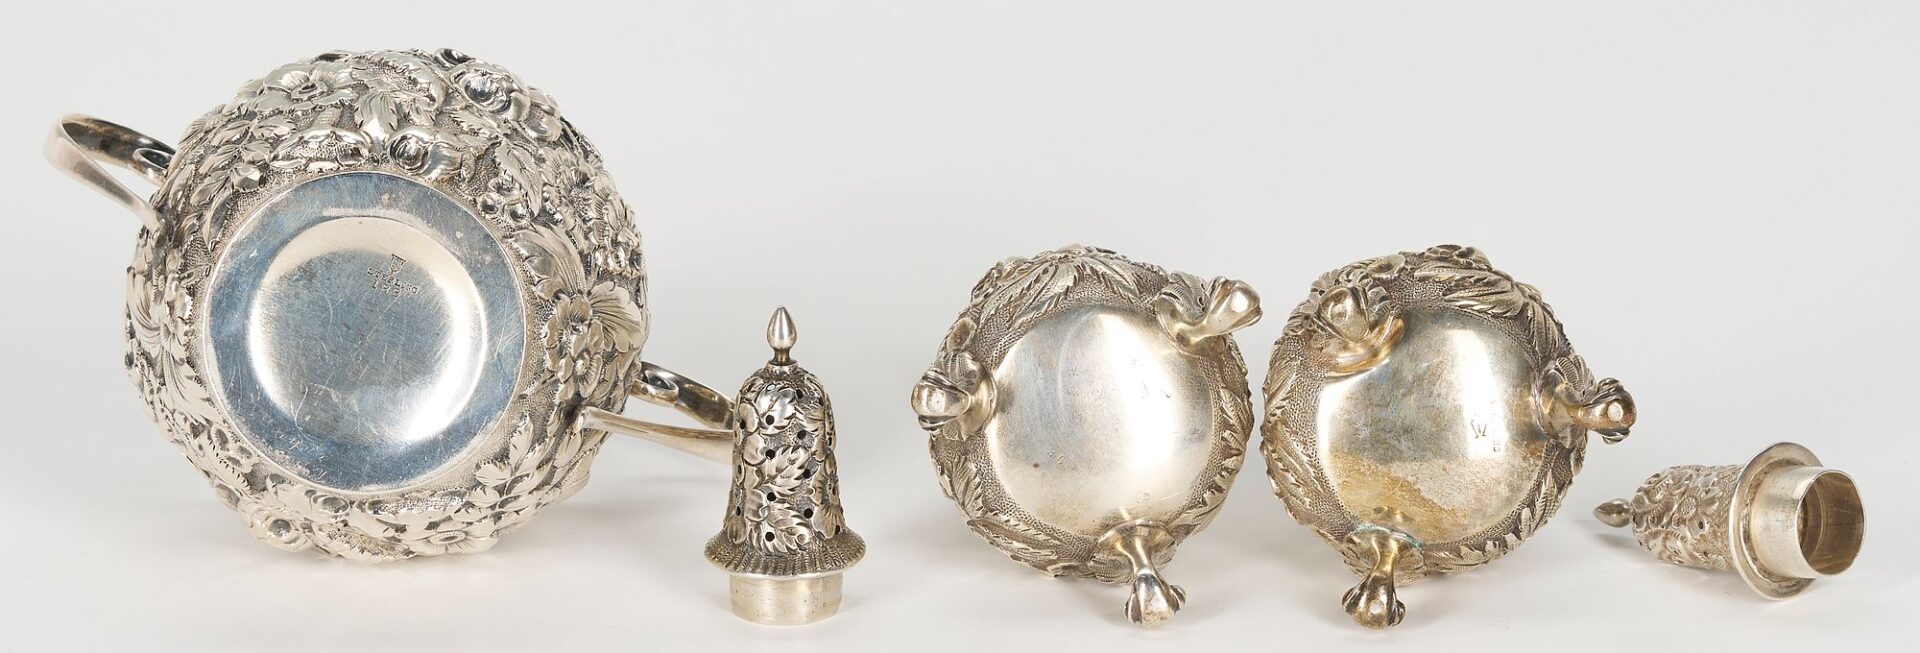 Lot 1070: 7 Items incl. Sterling Repousse Shakers, Snuff or Pill Boxes